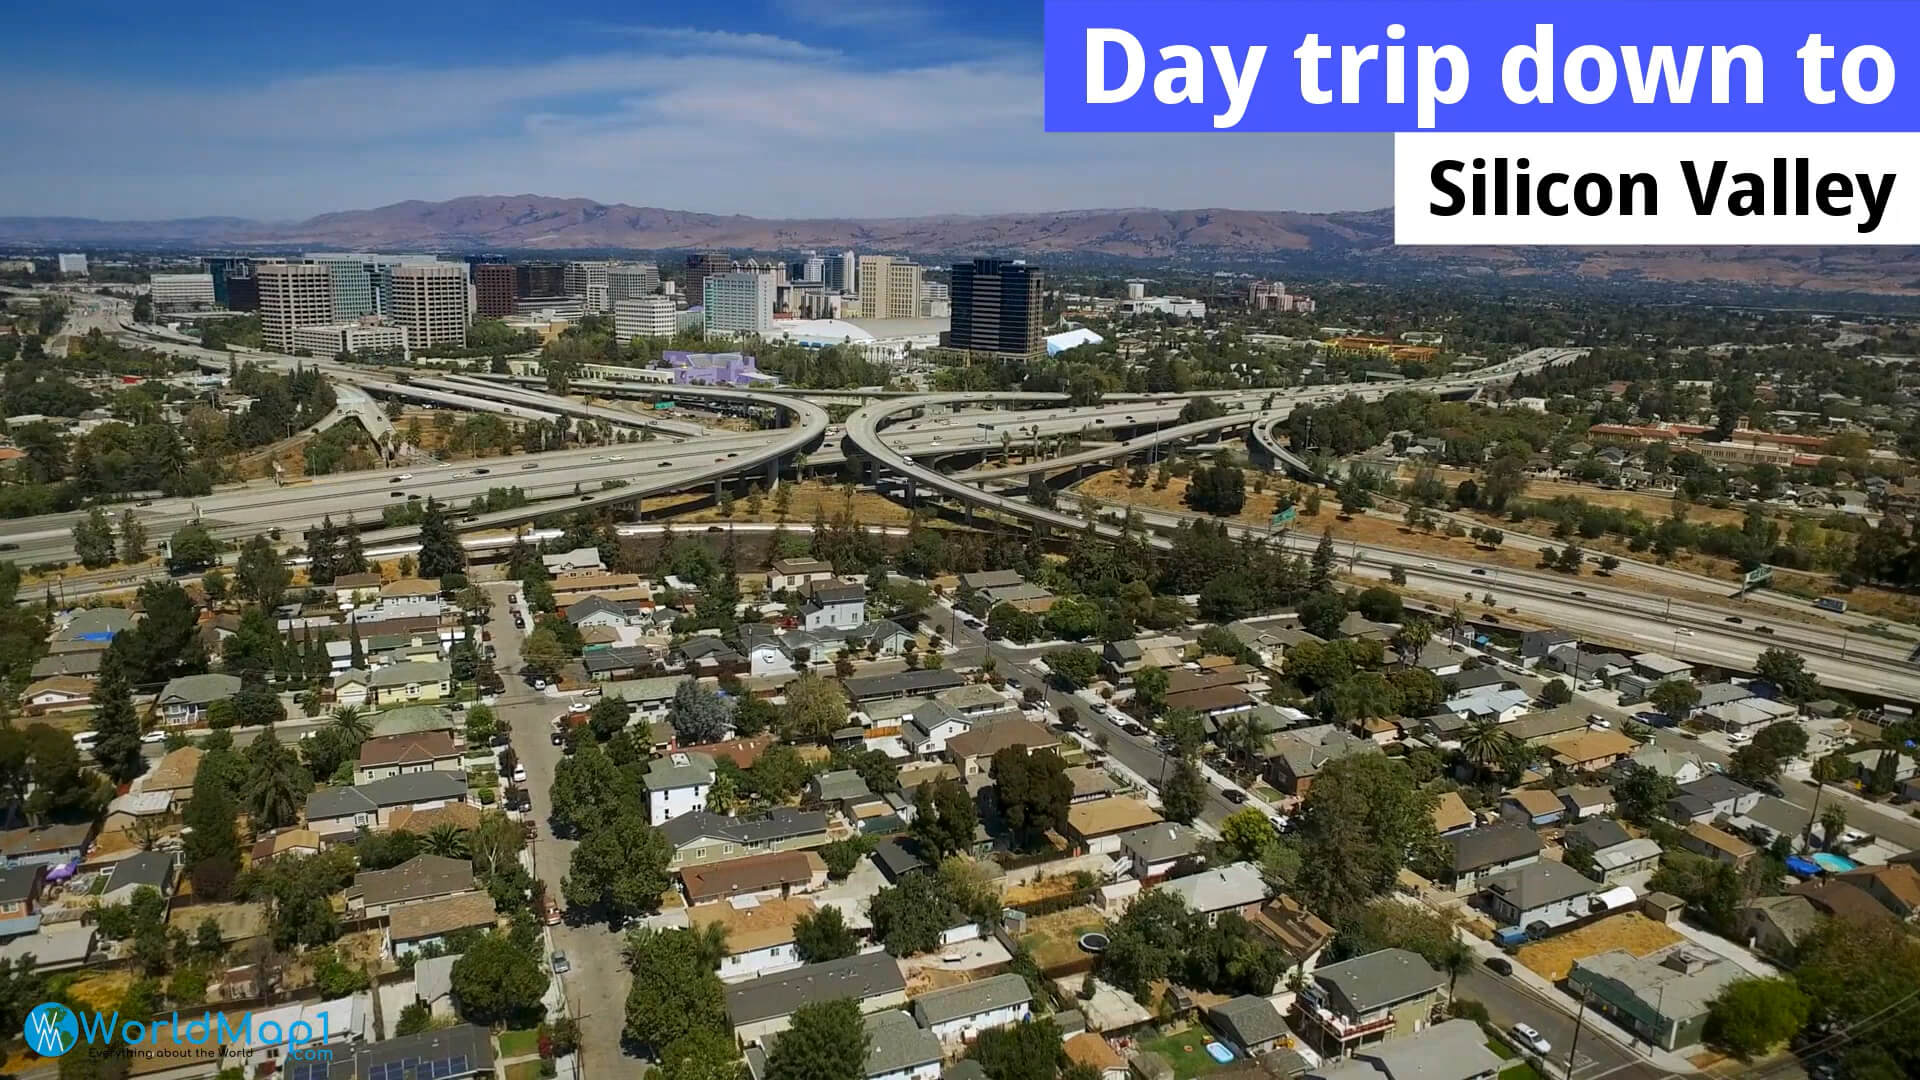 Take a day trip down to Silicon Valley